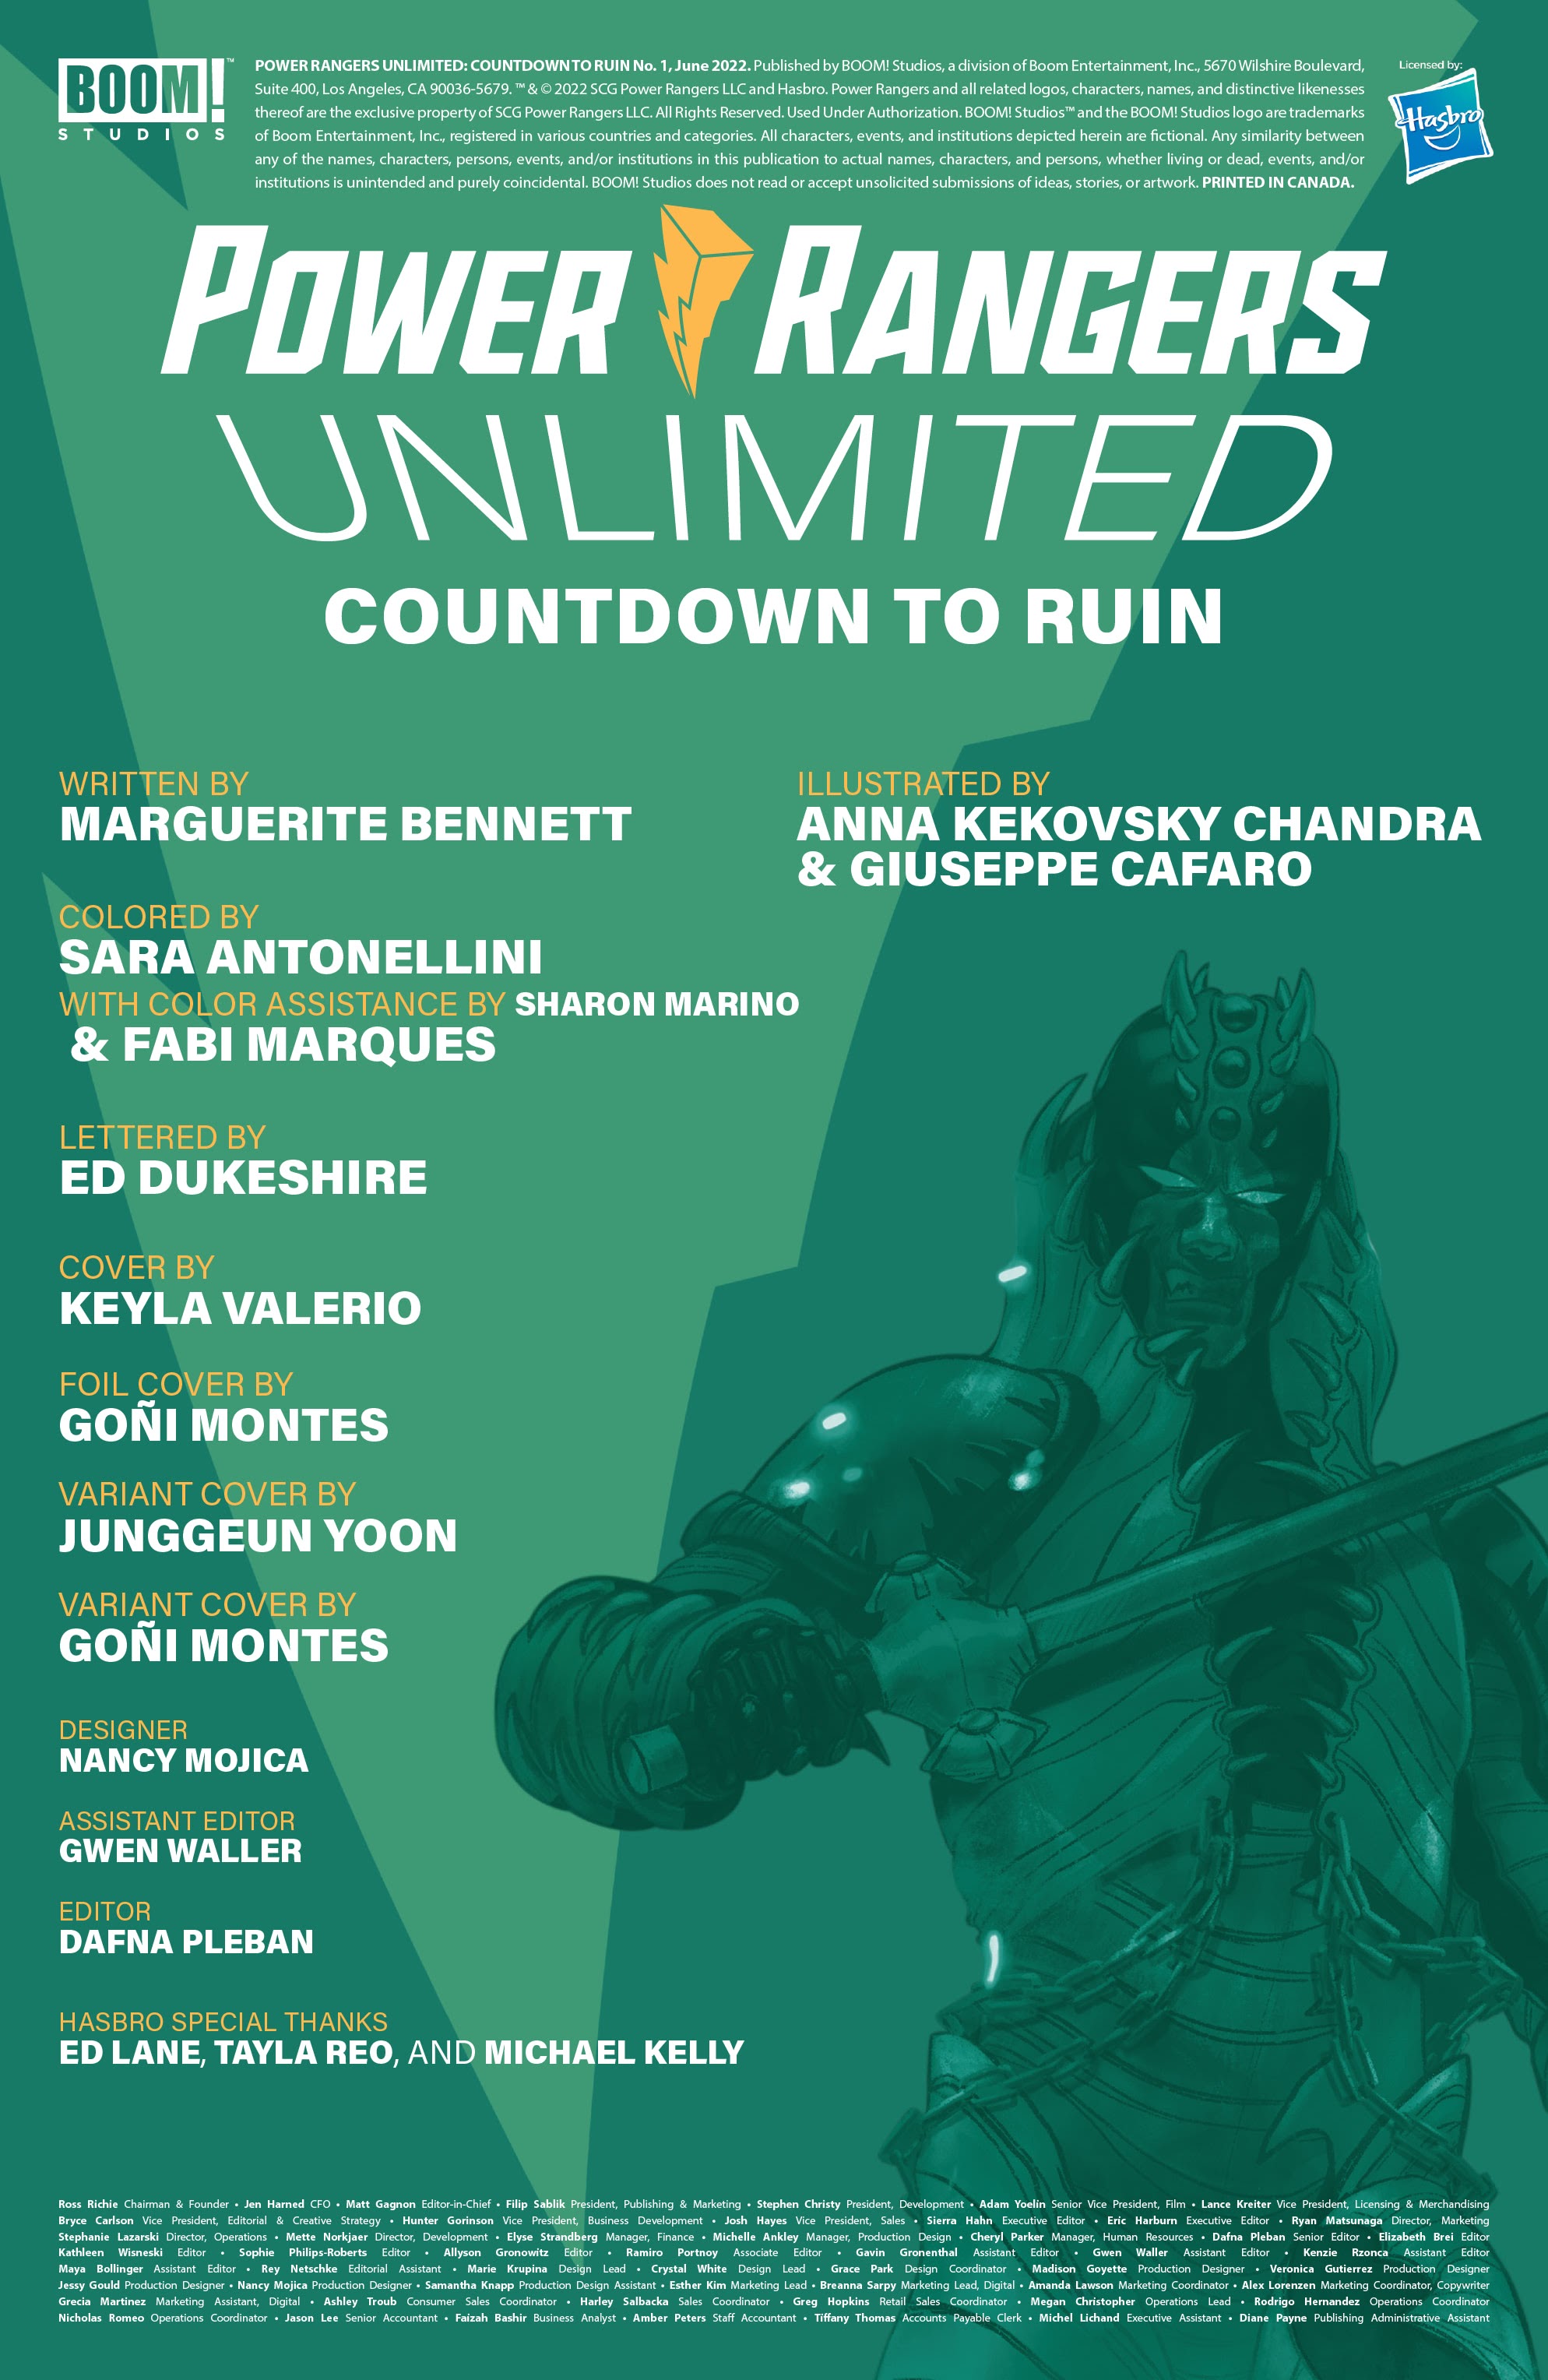 Read online Power Rangers Unlimited comic -  Issue # Countdown to Ruin - 2